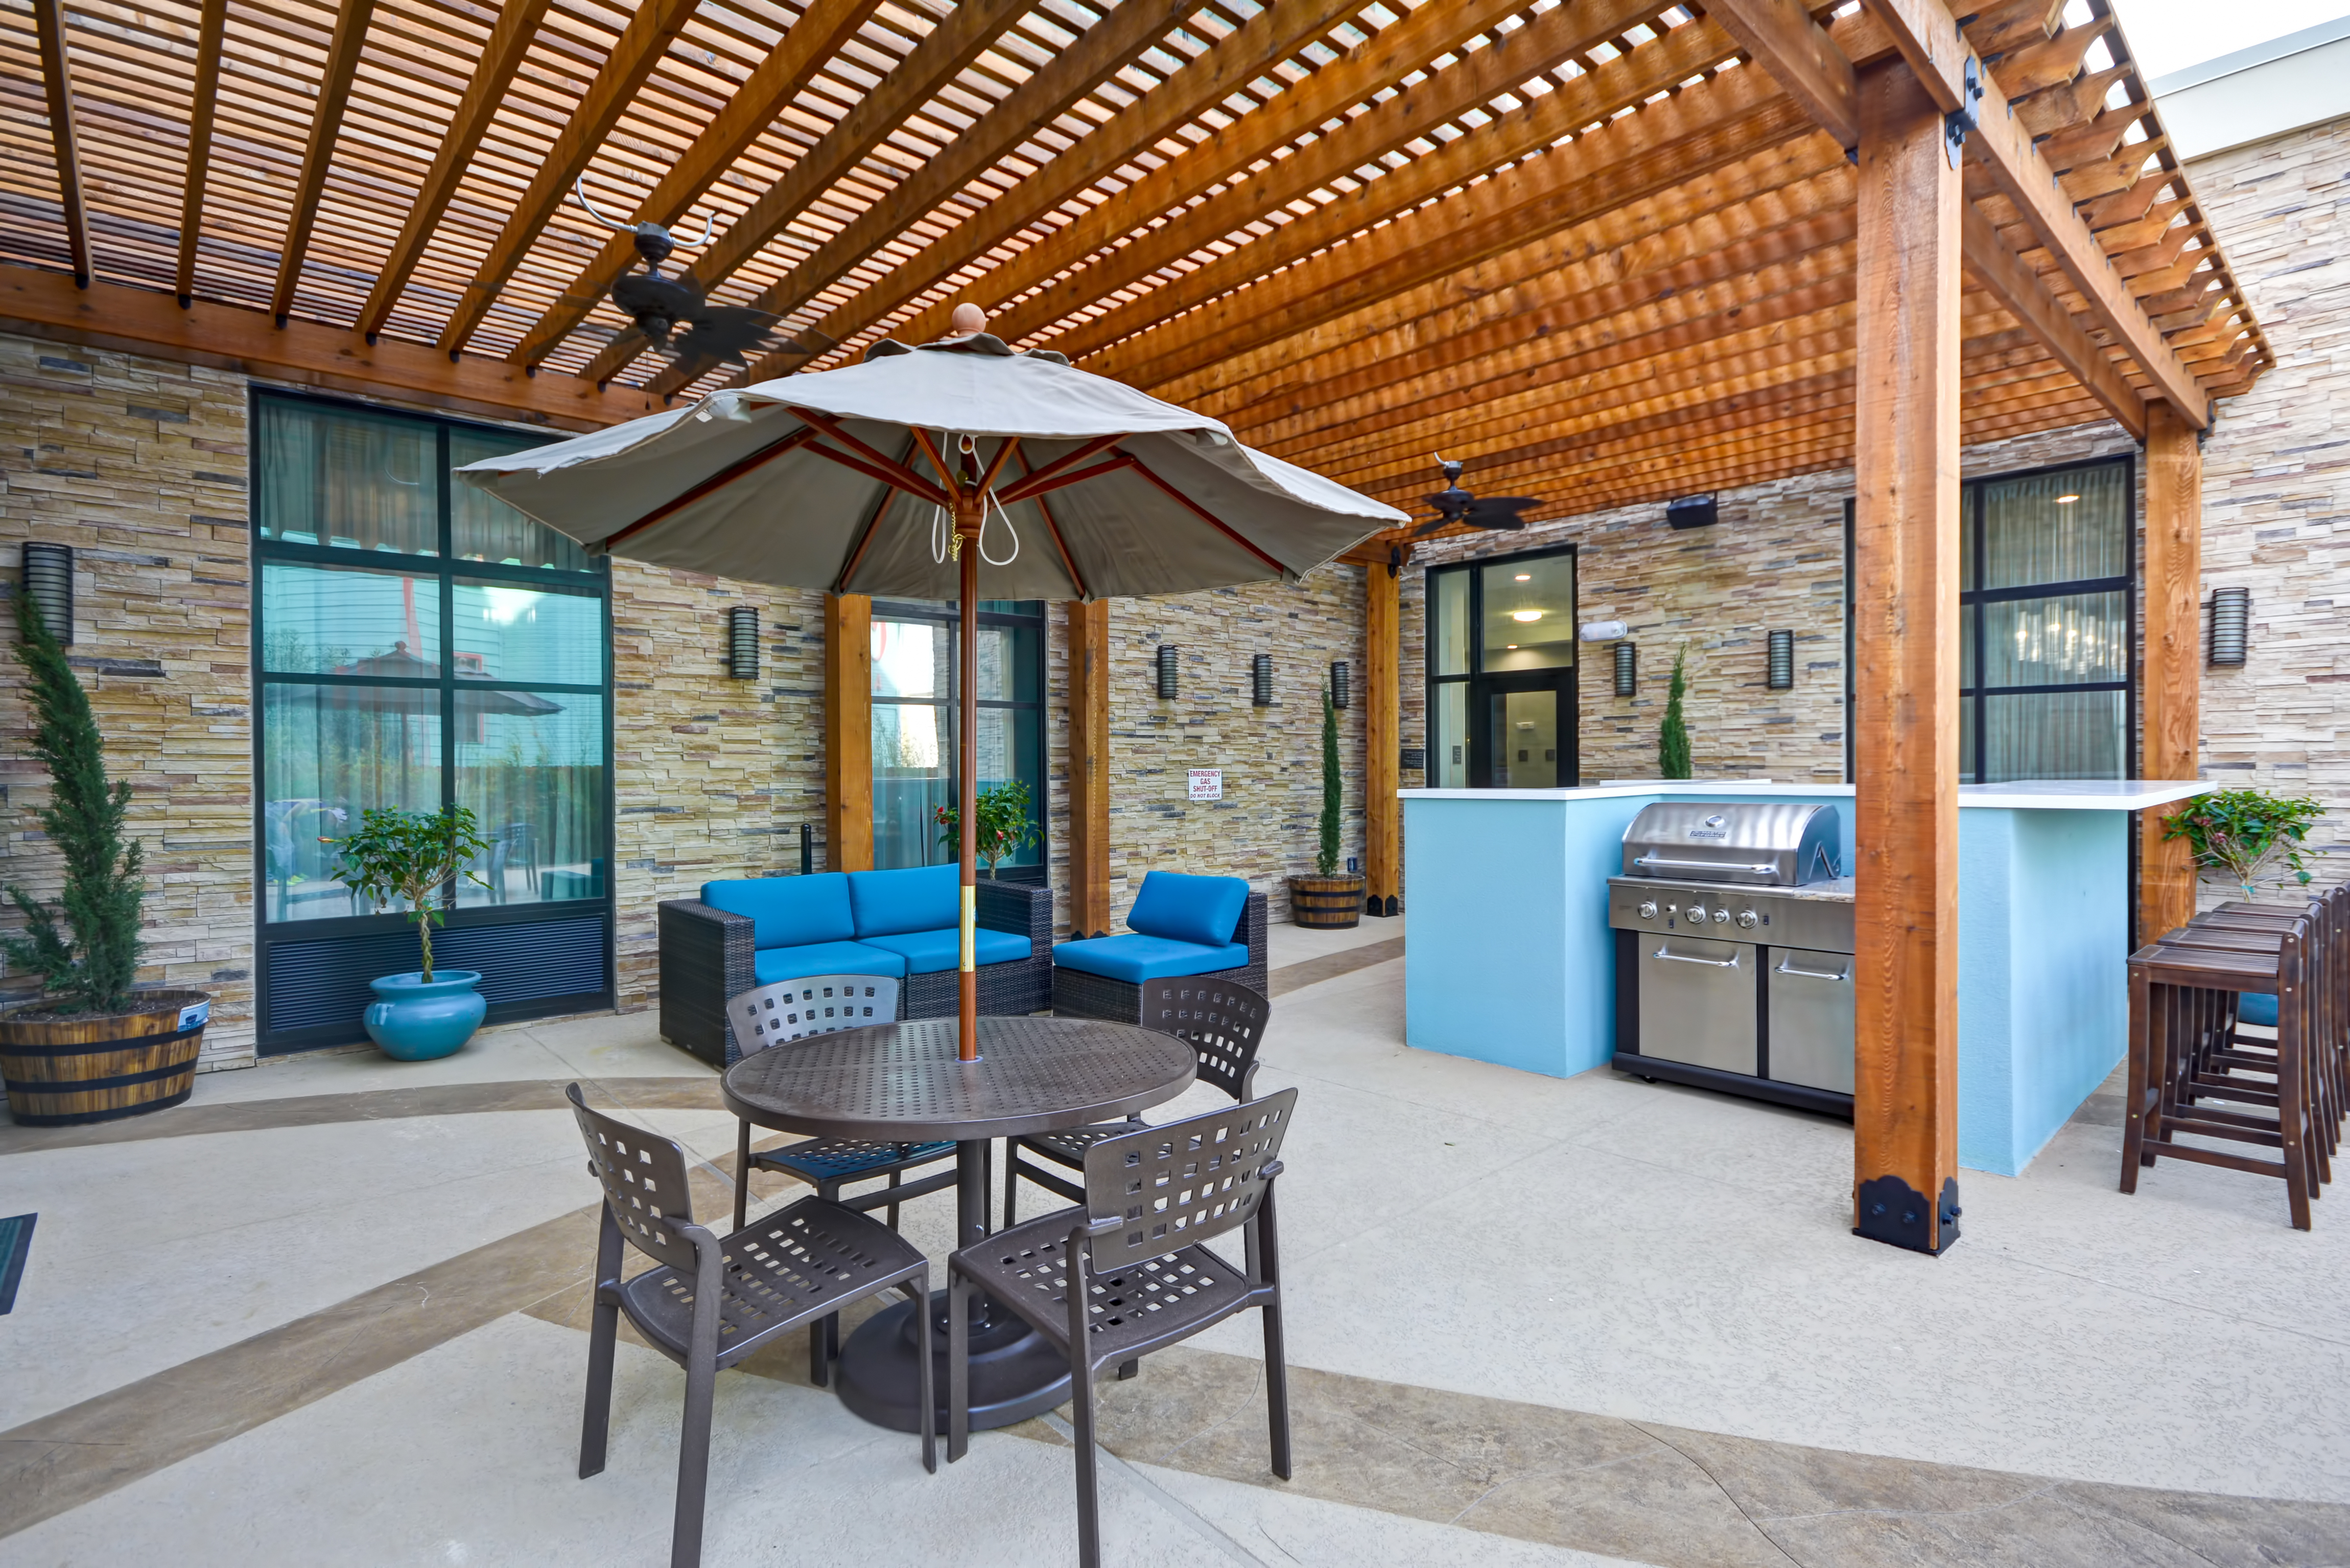 Outdoor Covered Patio with Tables and Chairs